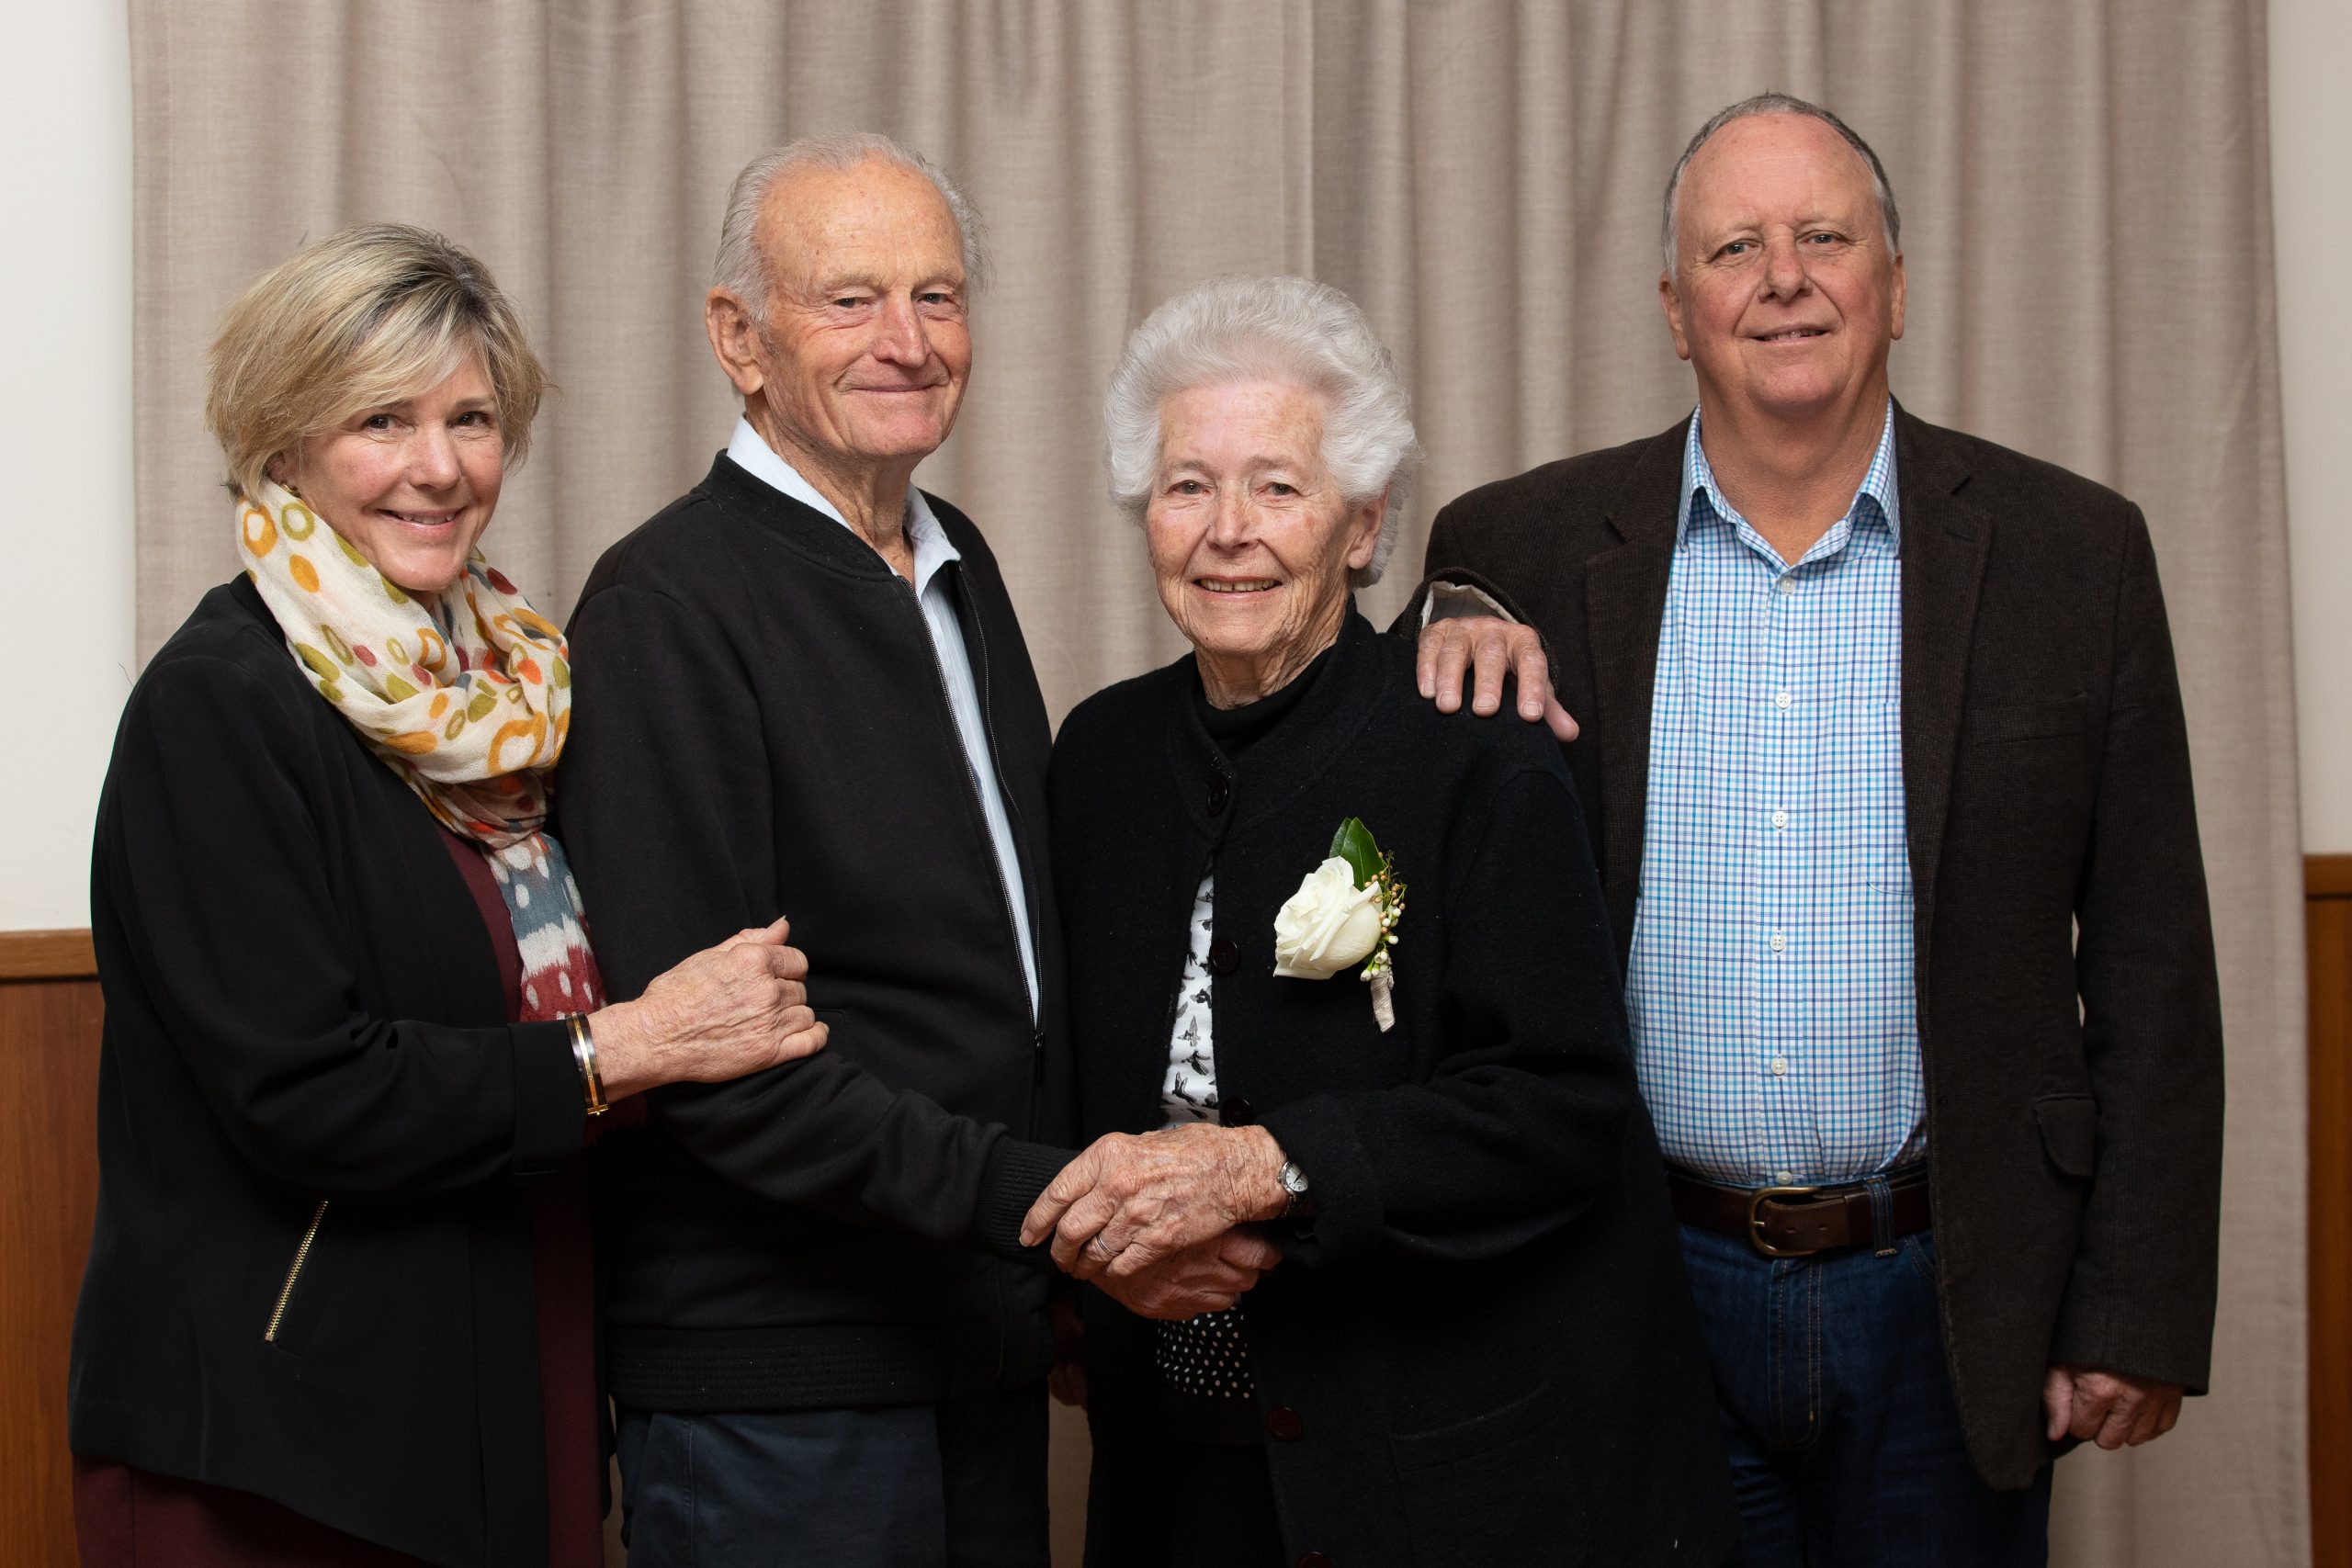 Centre, Frank and Norma Haldey photographed with their daughter Alice Cameron, left, and her husband Clark Cameron right. Photo Credit: John Burgess photography.